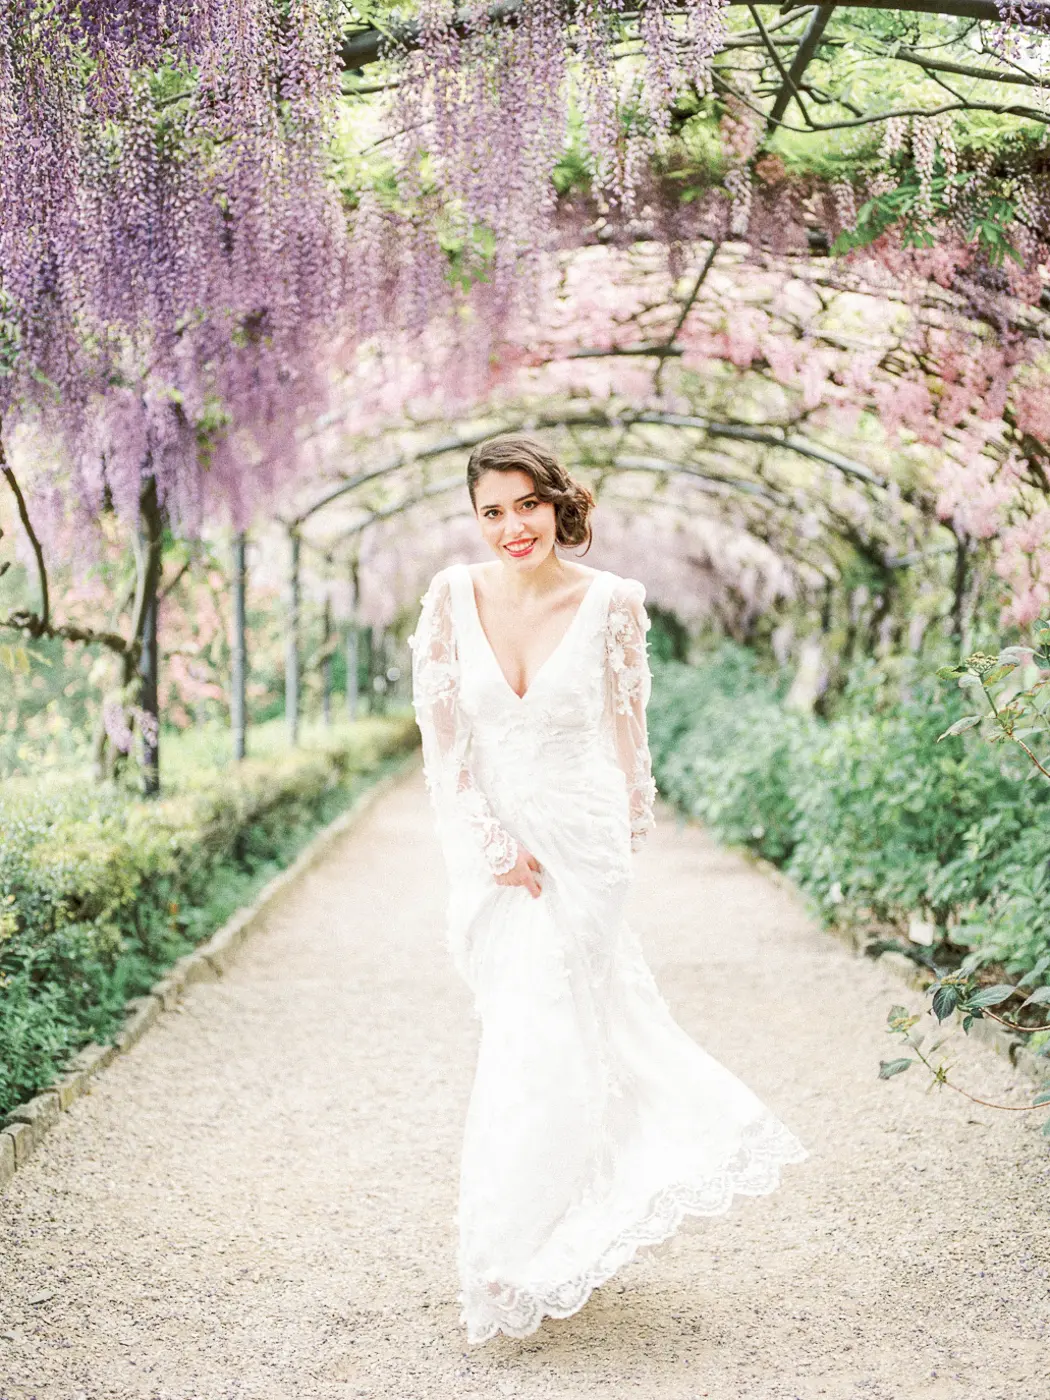 Timeless beauty in bloom: A captivating solo portrait of the bride framed by cascading wisteria, the delicate blooms complementing her grace and radiance on this special day in Florence